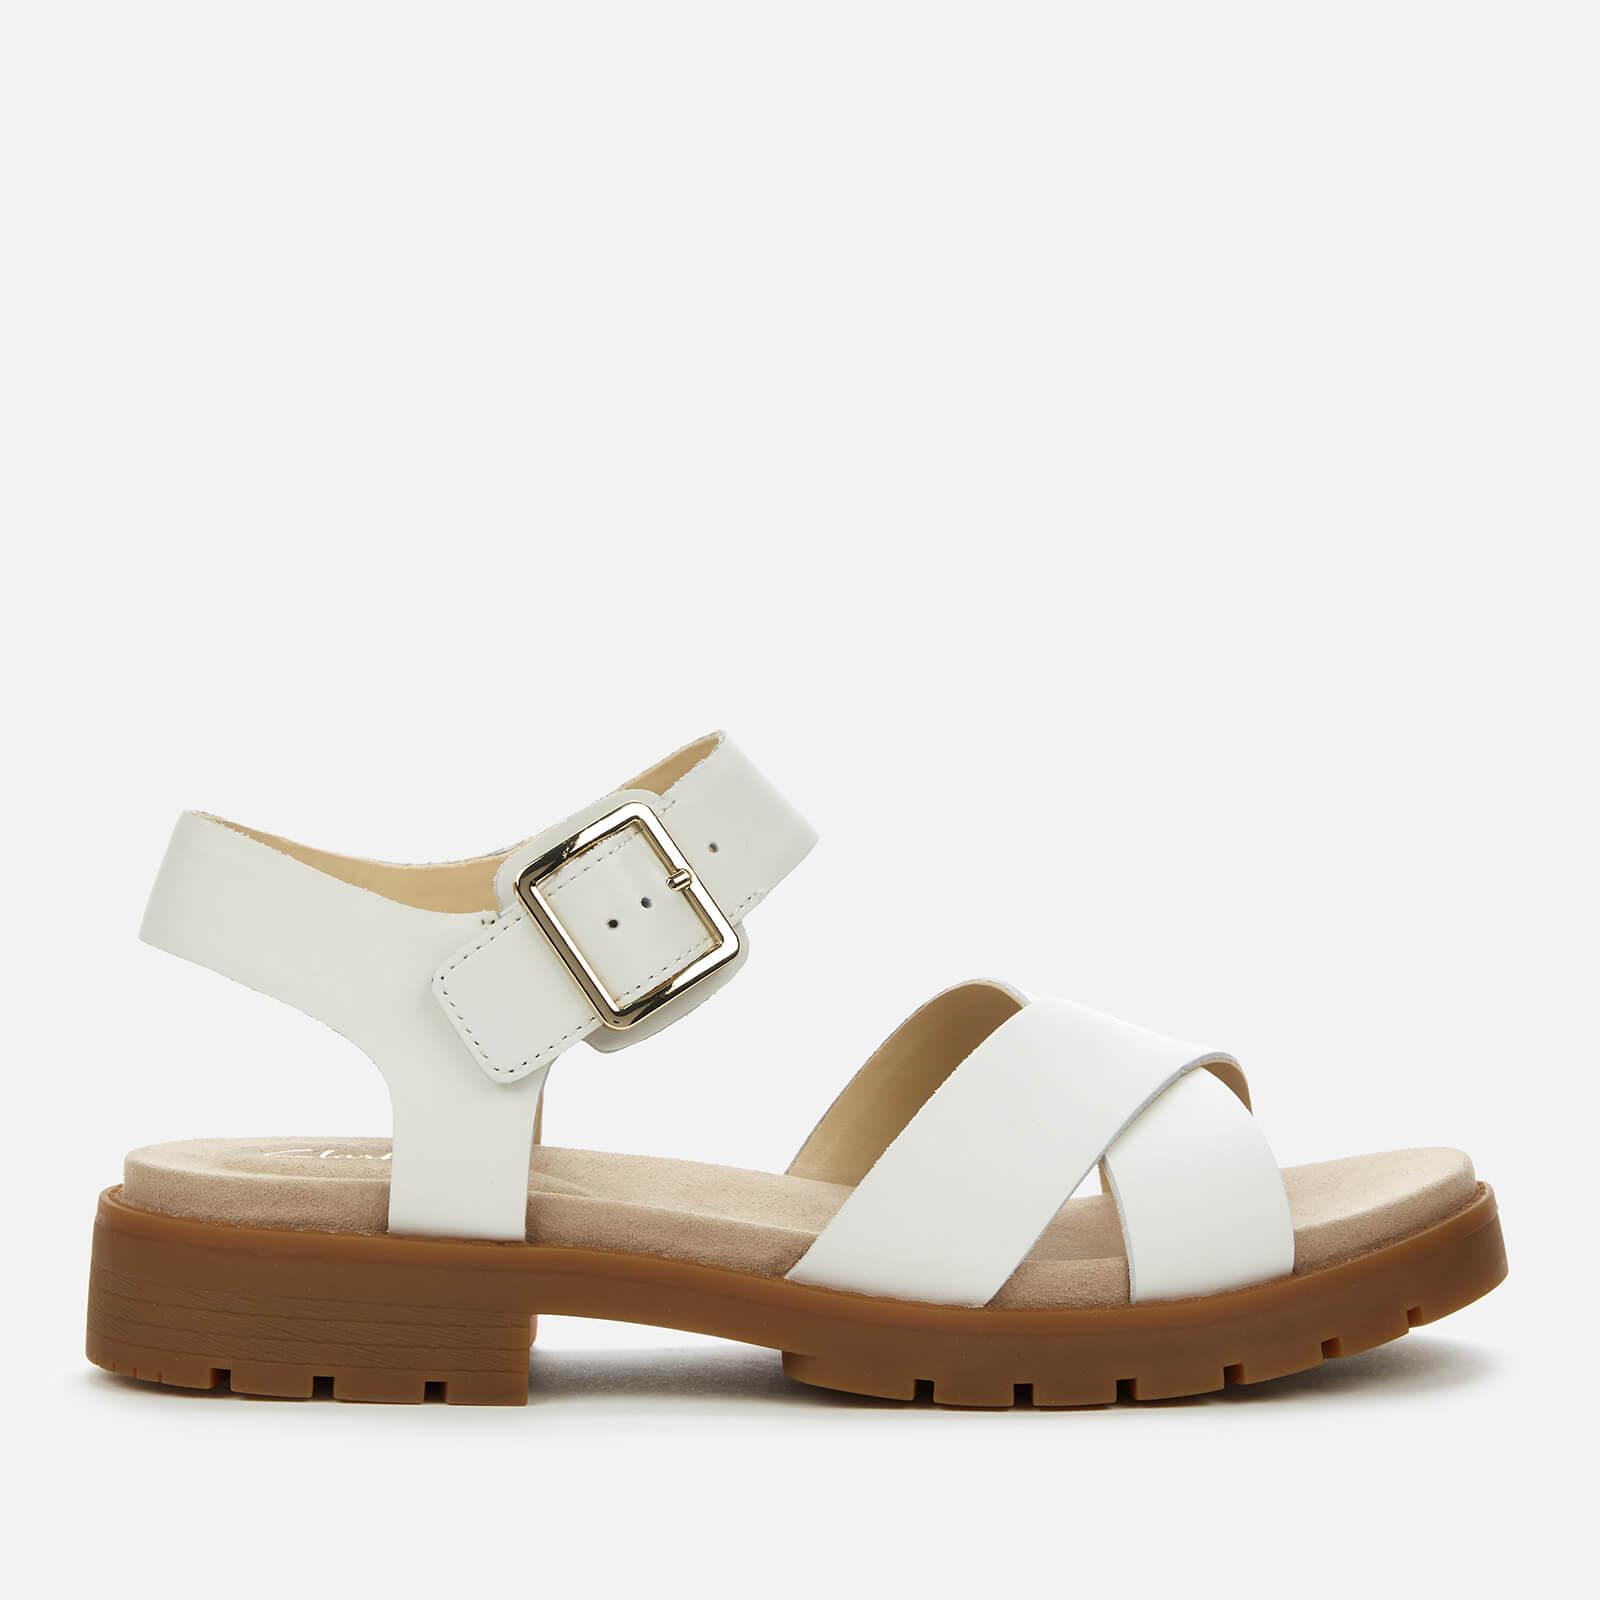 Clarks Orinoco Strap Leather Sandals in White | Lyst